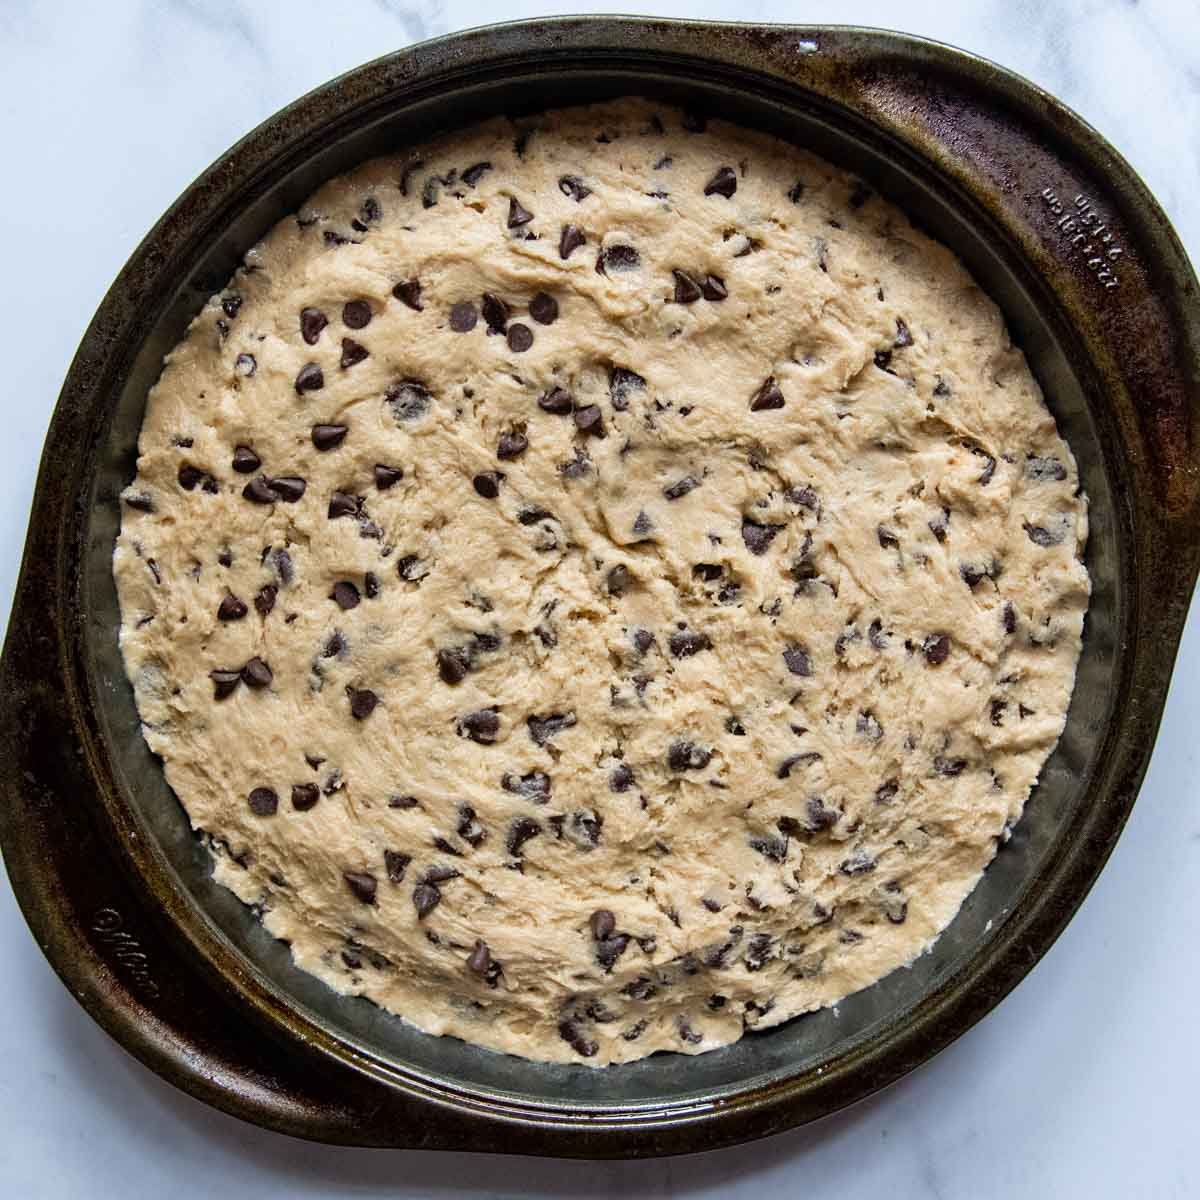 the unbaked cake in a pan.